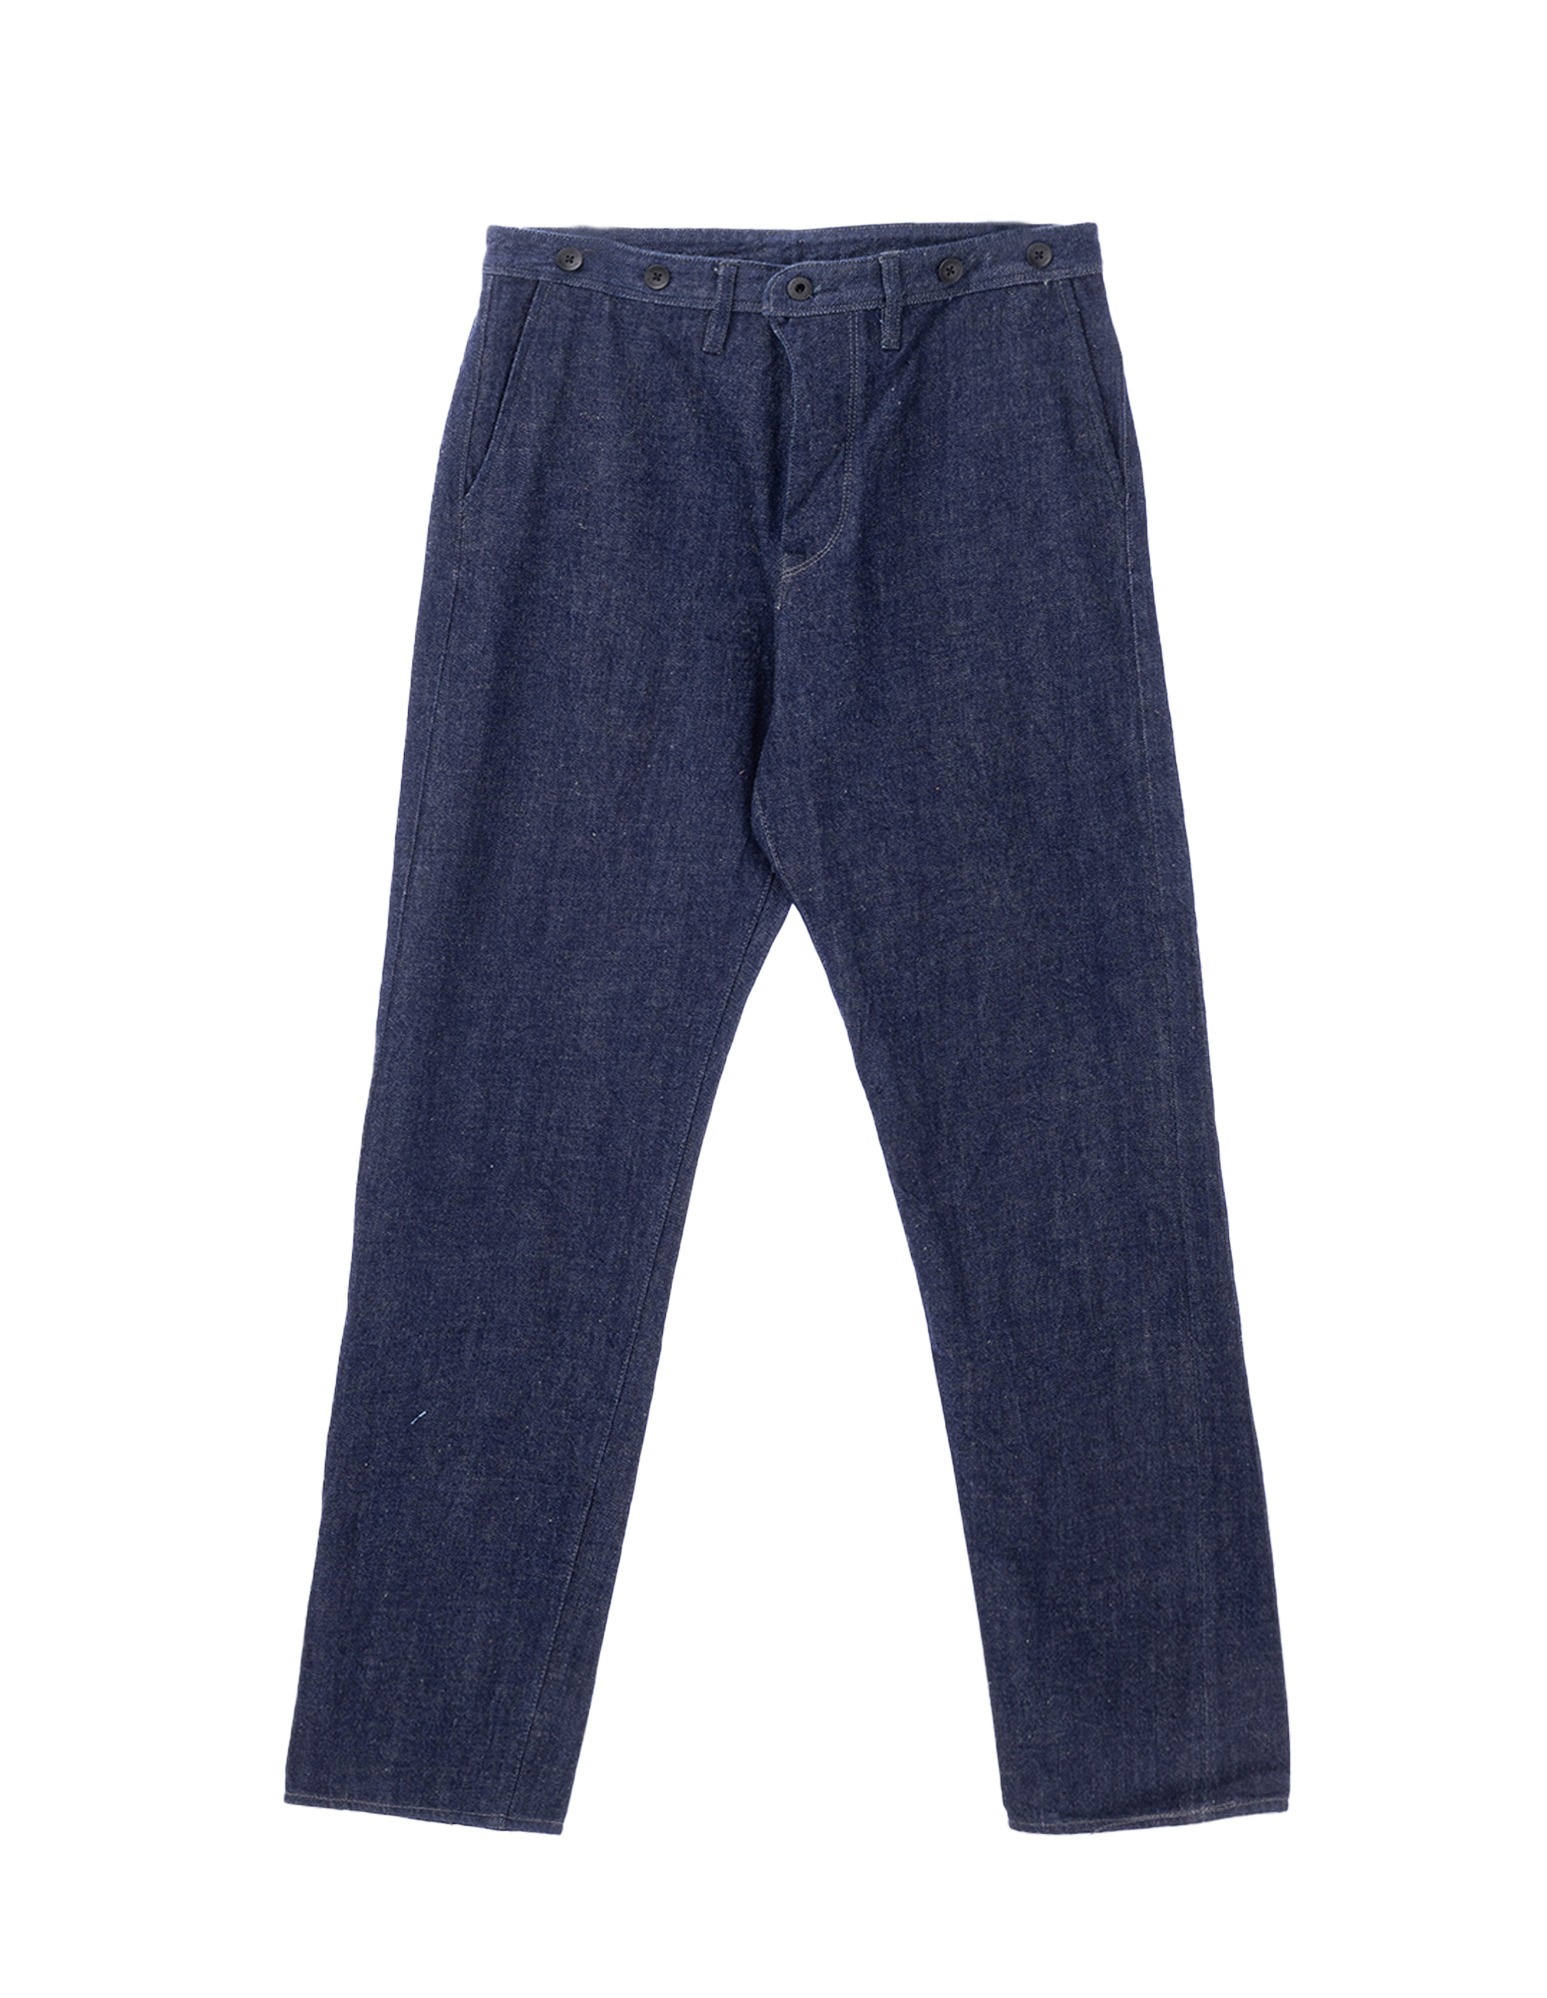 OR-1102 Denim Trousers (One Wash)